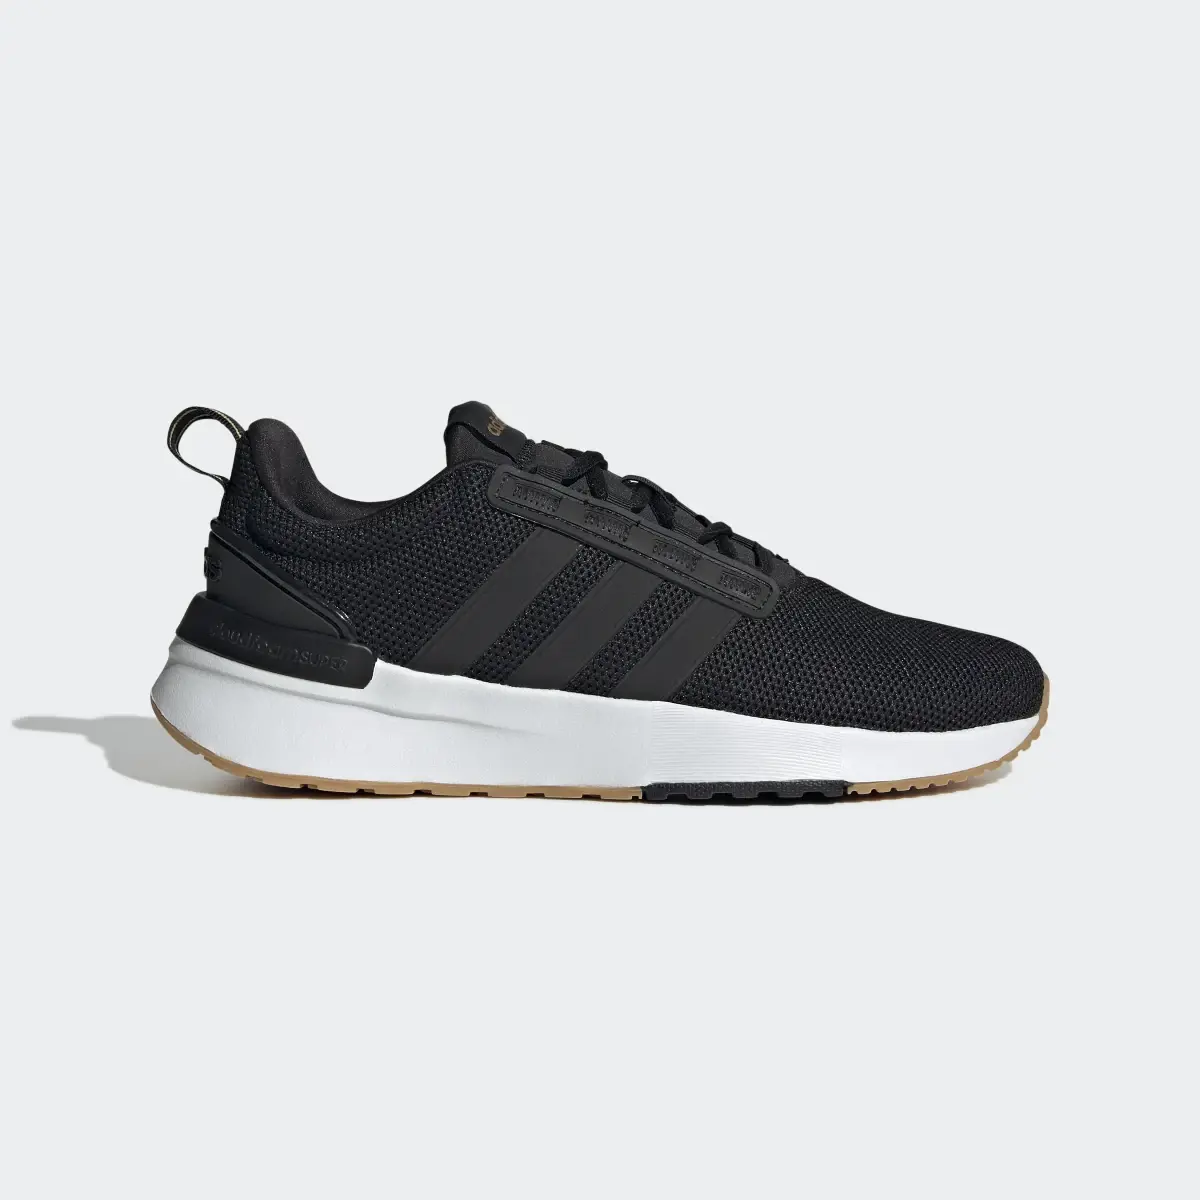 Adidas Racer TR21 Shoes. 2